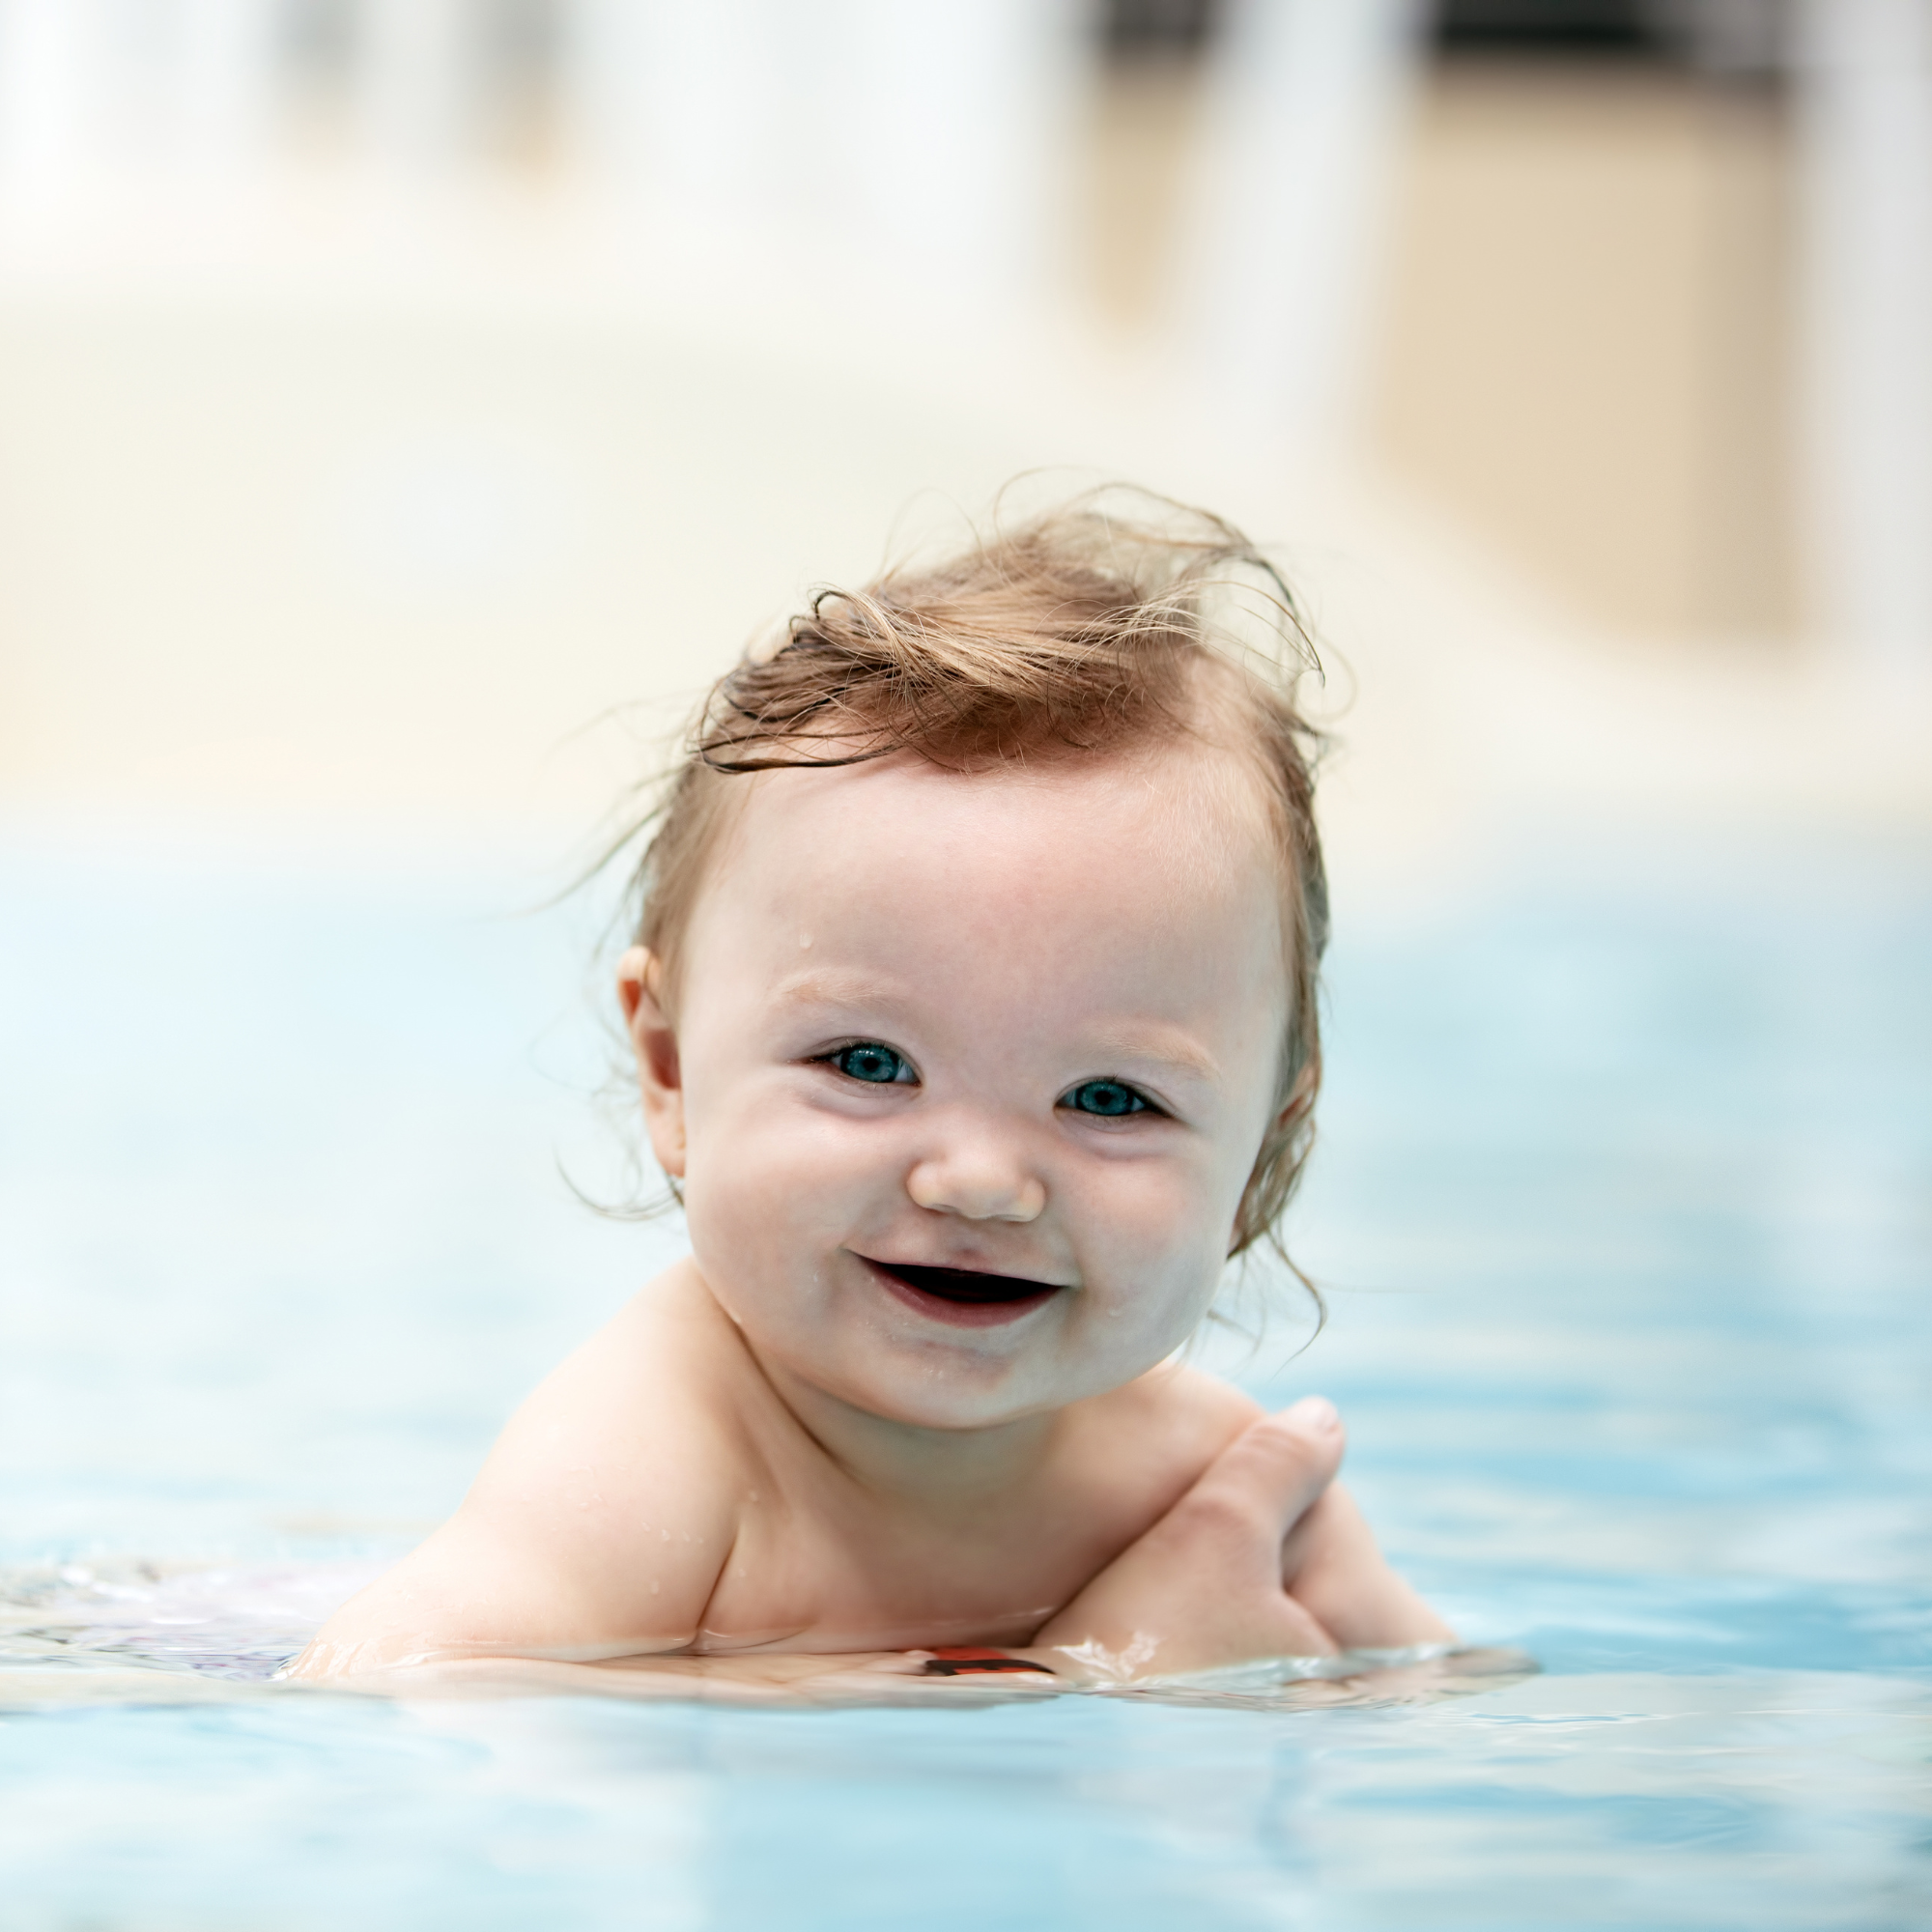 Smiling baby with long brown hair being held in the swimming pool | Water Safety | Family Time - Clair de Lune UK